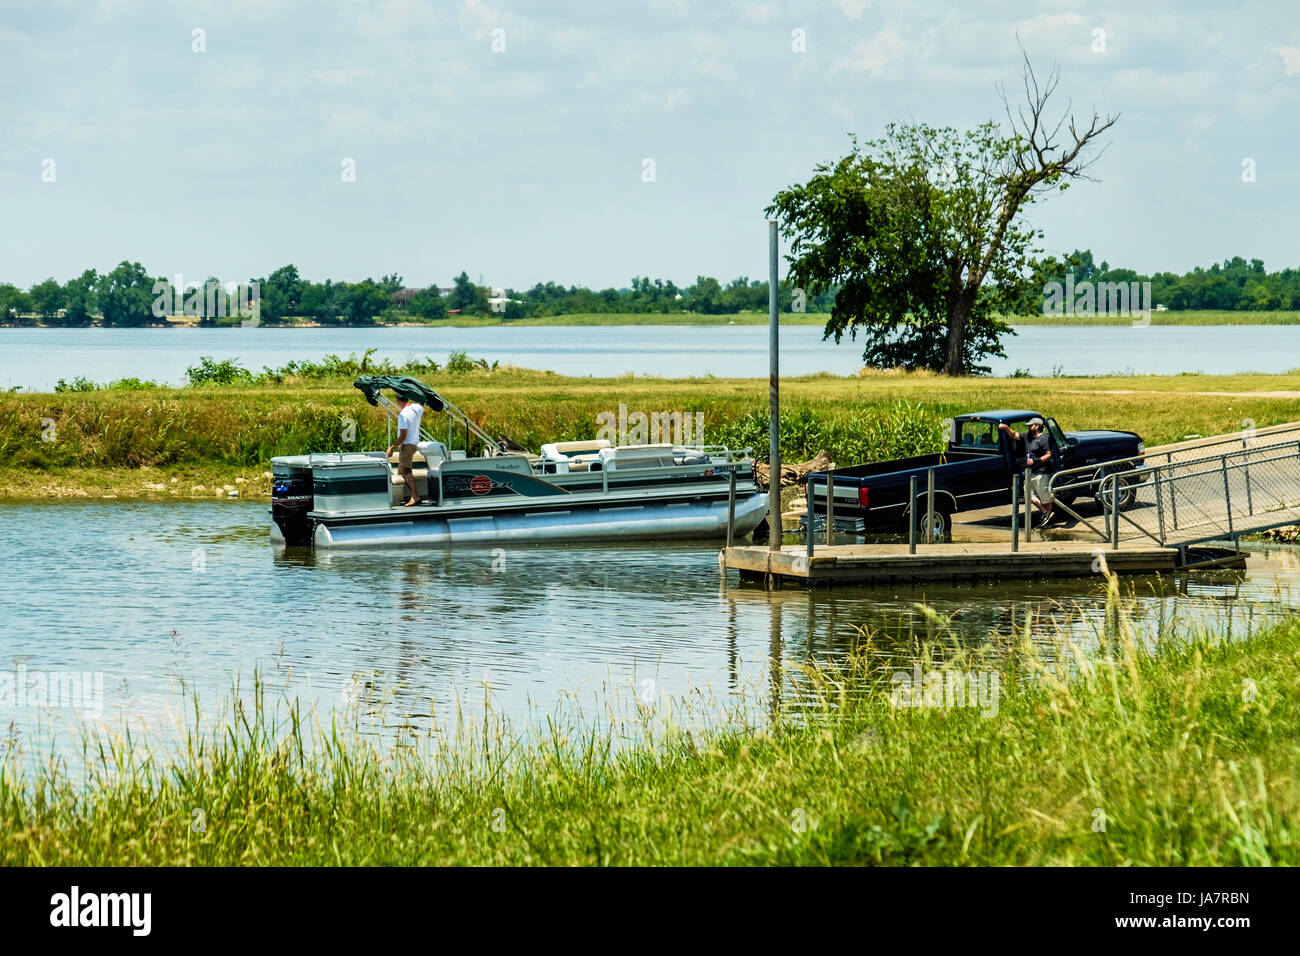 Two men load up a pontoon boat  onto a boat trailer after fishing on Overholser lake in Oklahoma City, Oklahoma, USA. Stock Photo